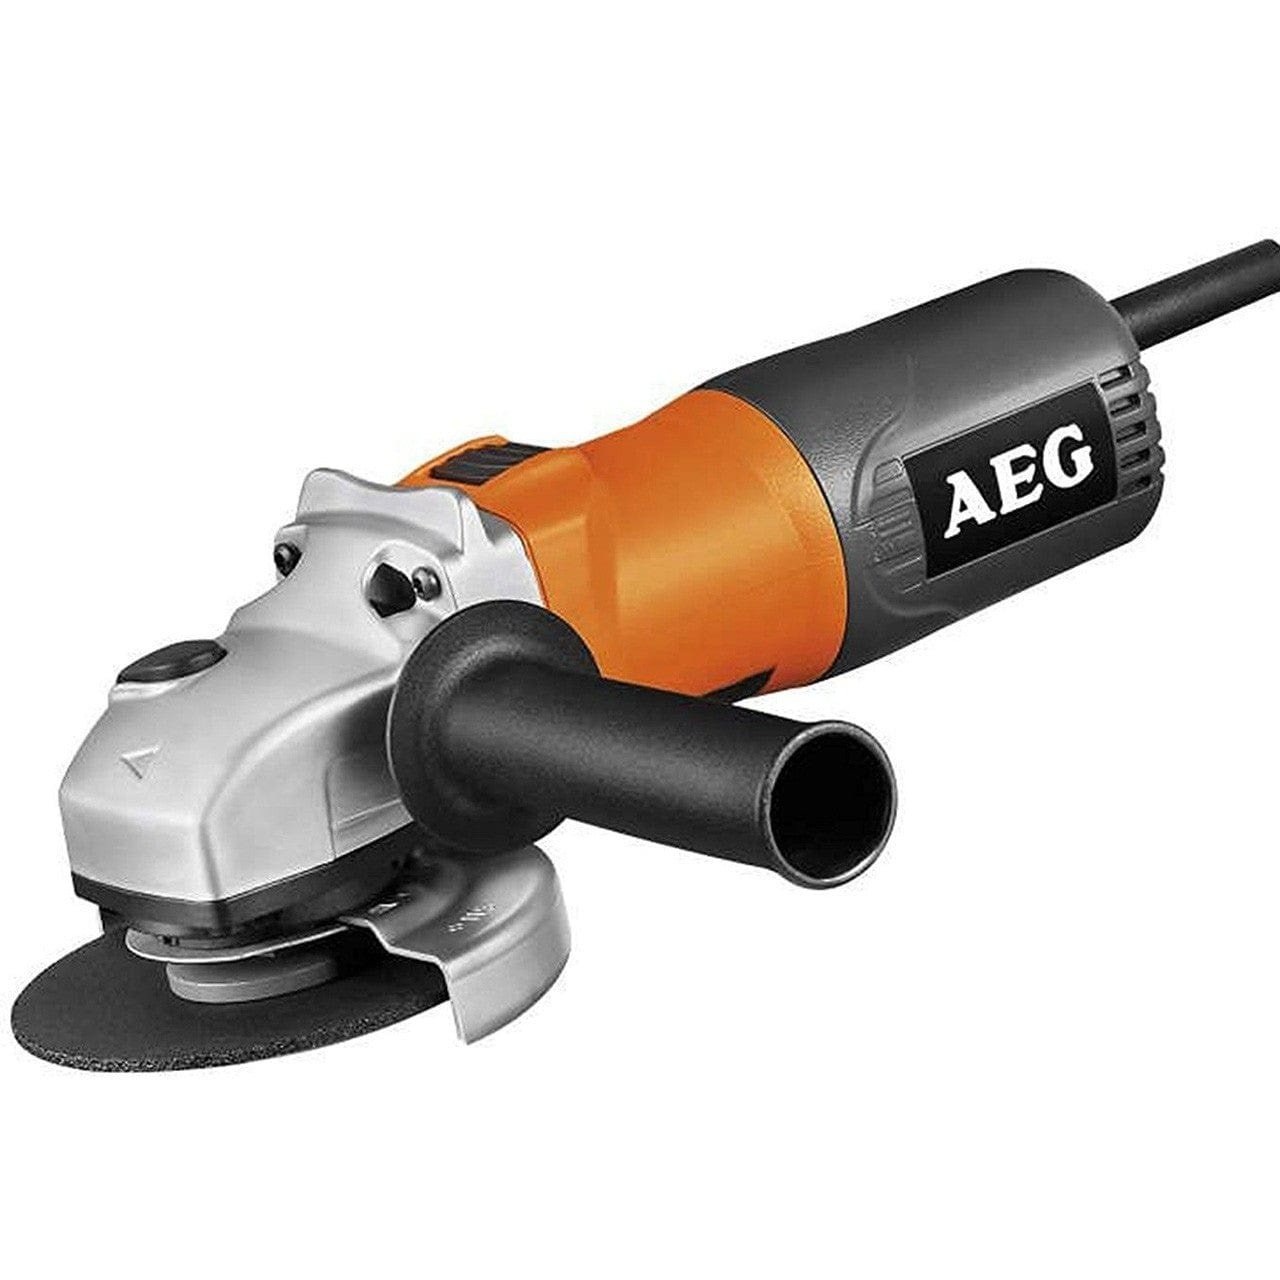 AEG 4.5"/115mm Angle Grinder 800W - WS8-115 | Supply Master | Accra, Ghana Grinder Buy Tools hardware Building materials